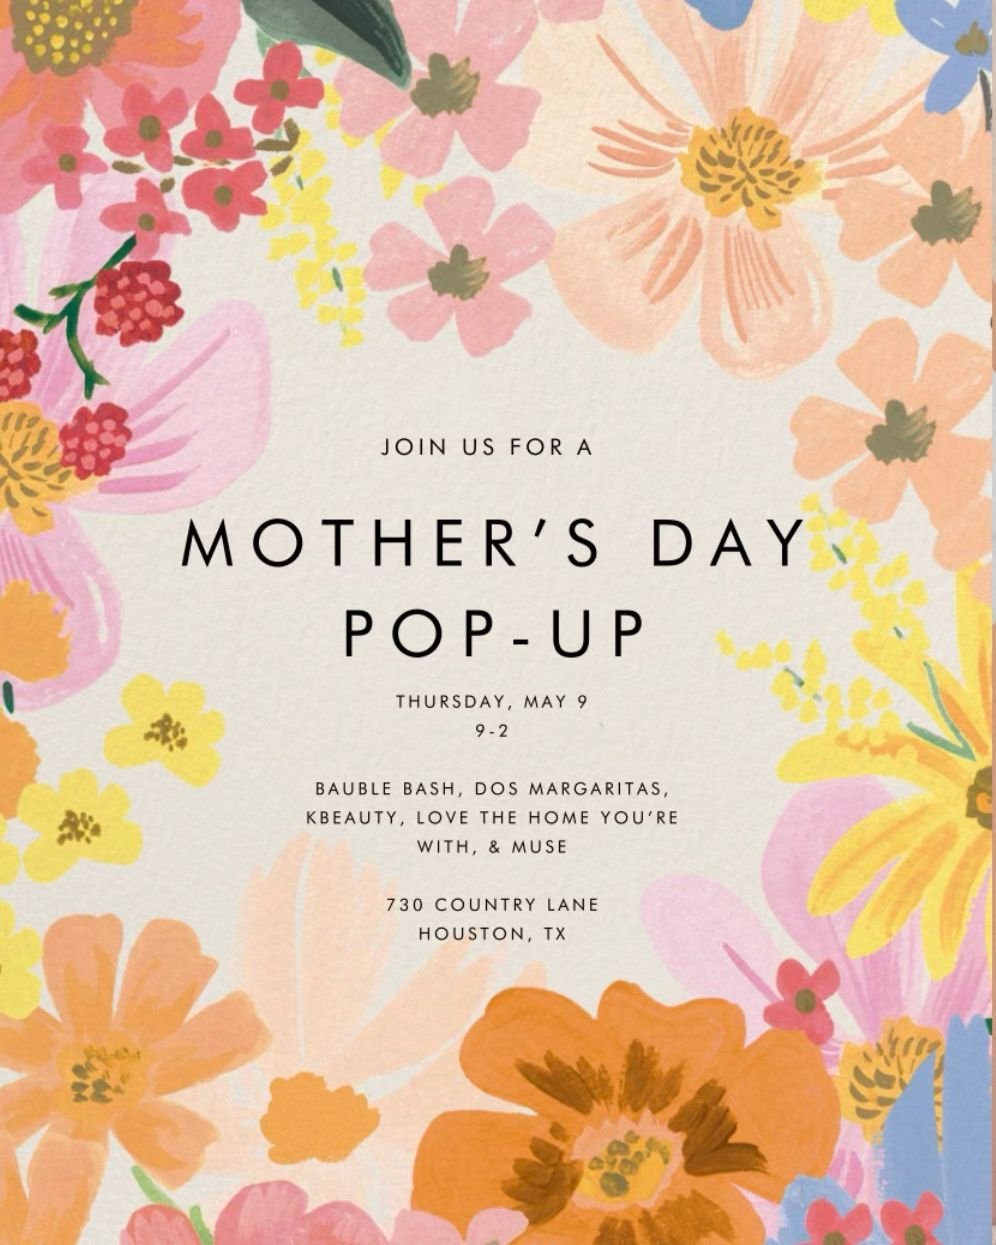 The Hits Just Keep Coming!  We&rsquo;ve had a siesta and are ready for more May fun.  Join us this Thursday from 9a - 2p with our pals BAUBLE BASH, CLEANKBEAUTY, LOVE THE HOME YOU'RE WITH, &amp; MUSE for a Mother&rsquo;s Day house party at Lindsey&rs